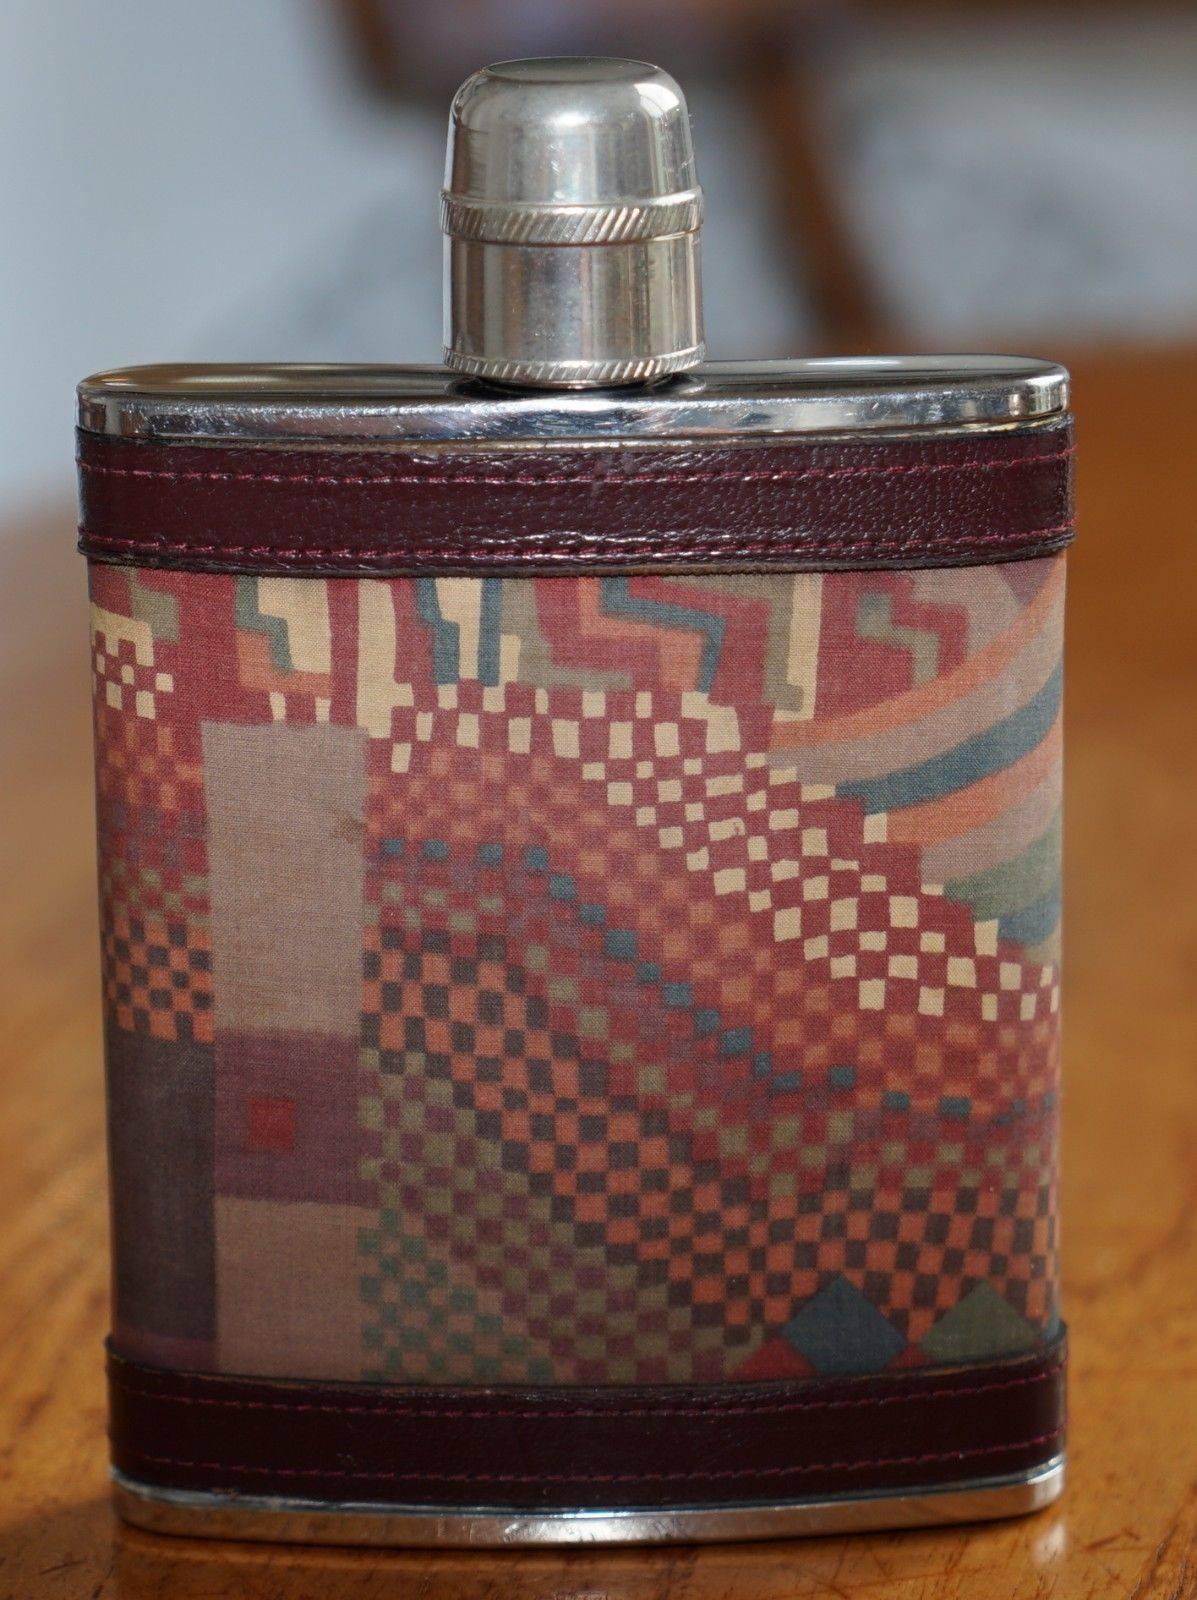 We are delighted to offer for sale this absolutely stunning handmade in England Liberty London hip flask

Full stamped to the base stainless steel 6oz, the cover is aged brown saddle leather and kilim, the leather is gold leaf embossed